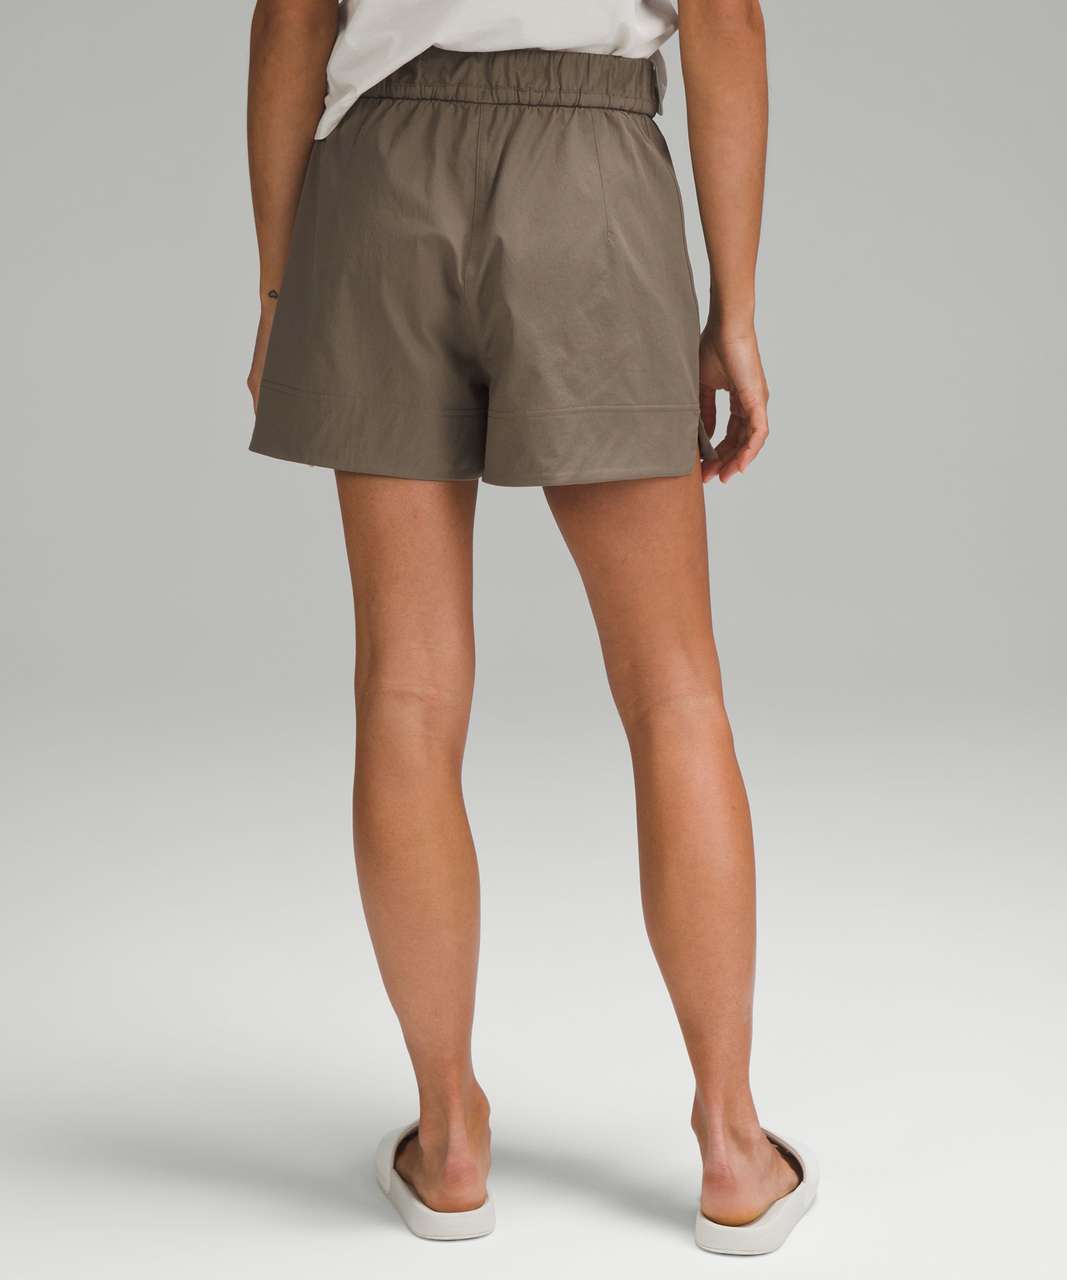 joylab woven shorts are back! love the high rise and full elastic wais